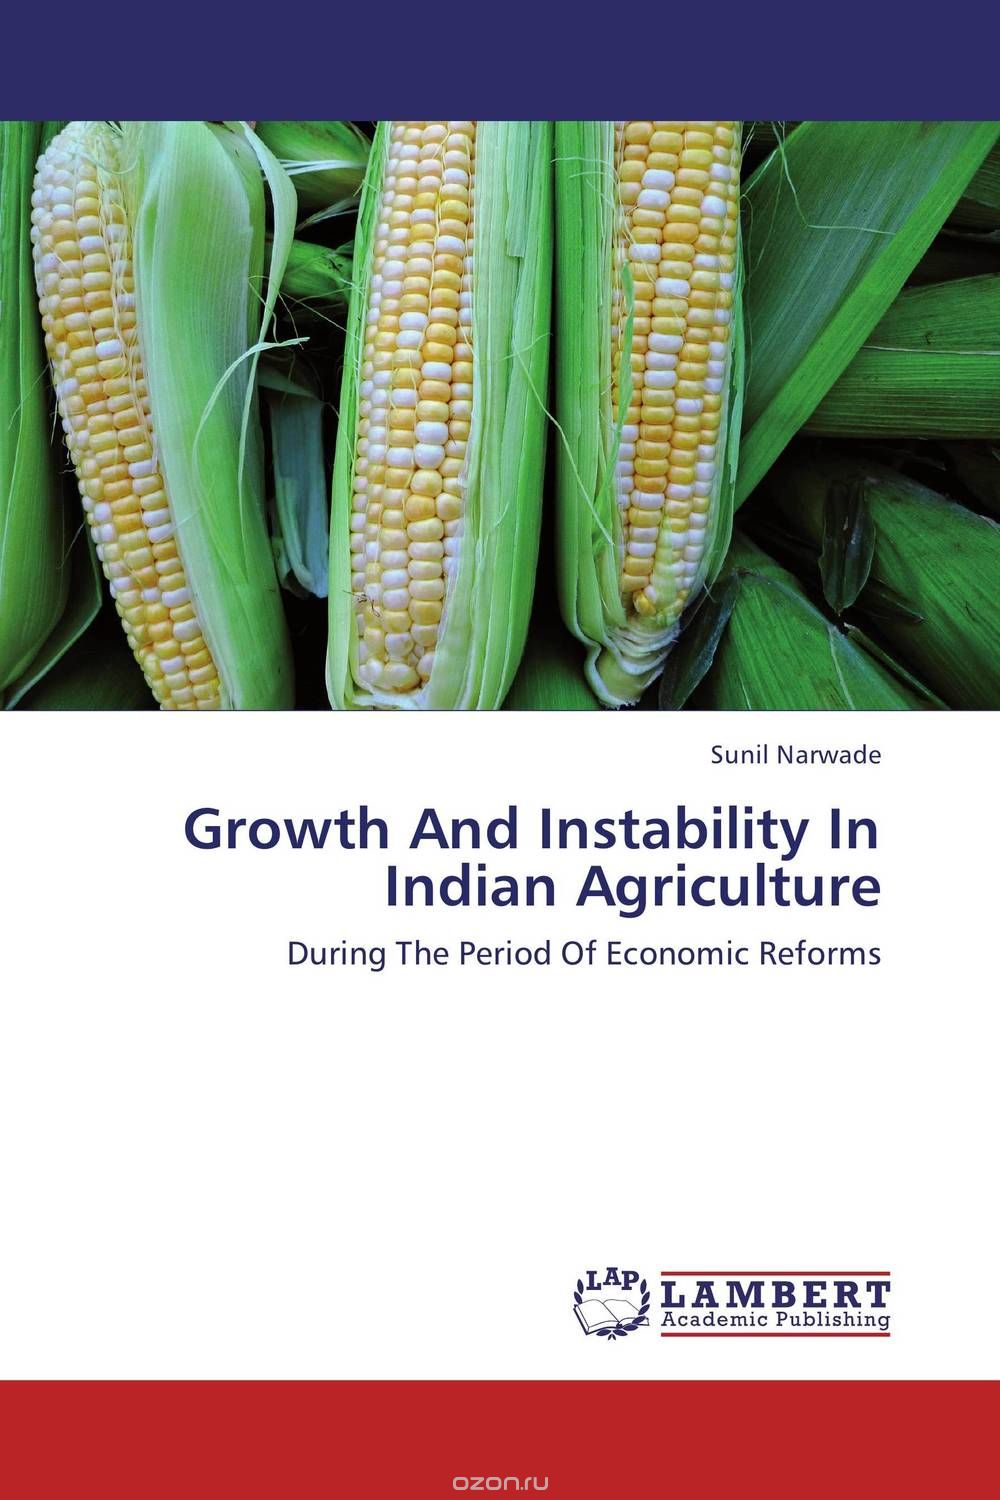 Growth And Instability In Indian Agriculture